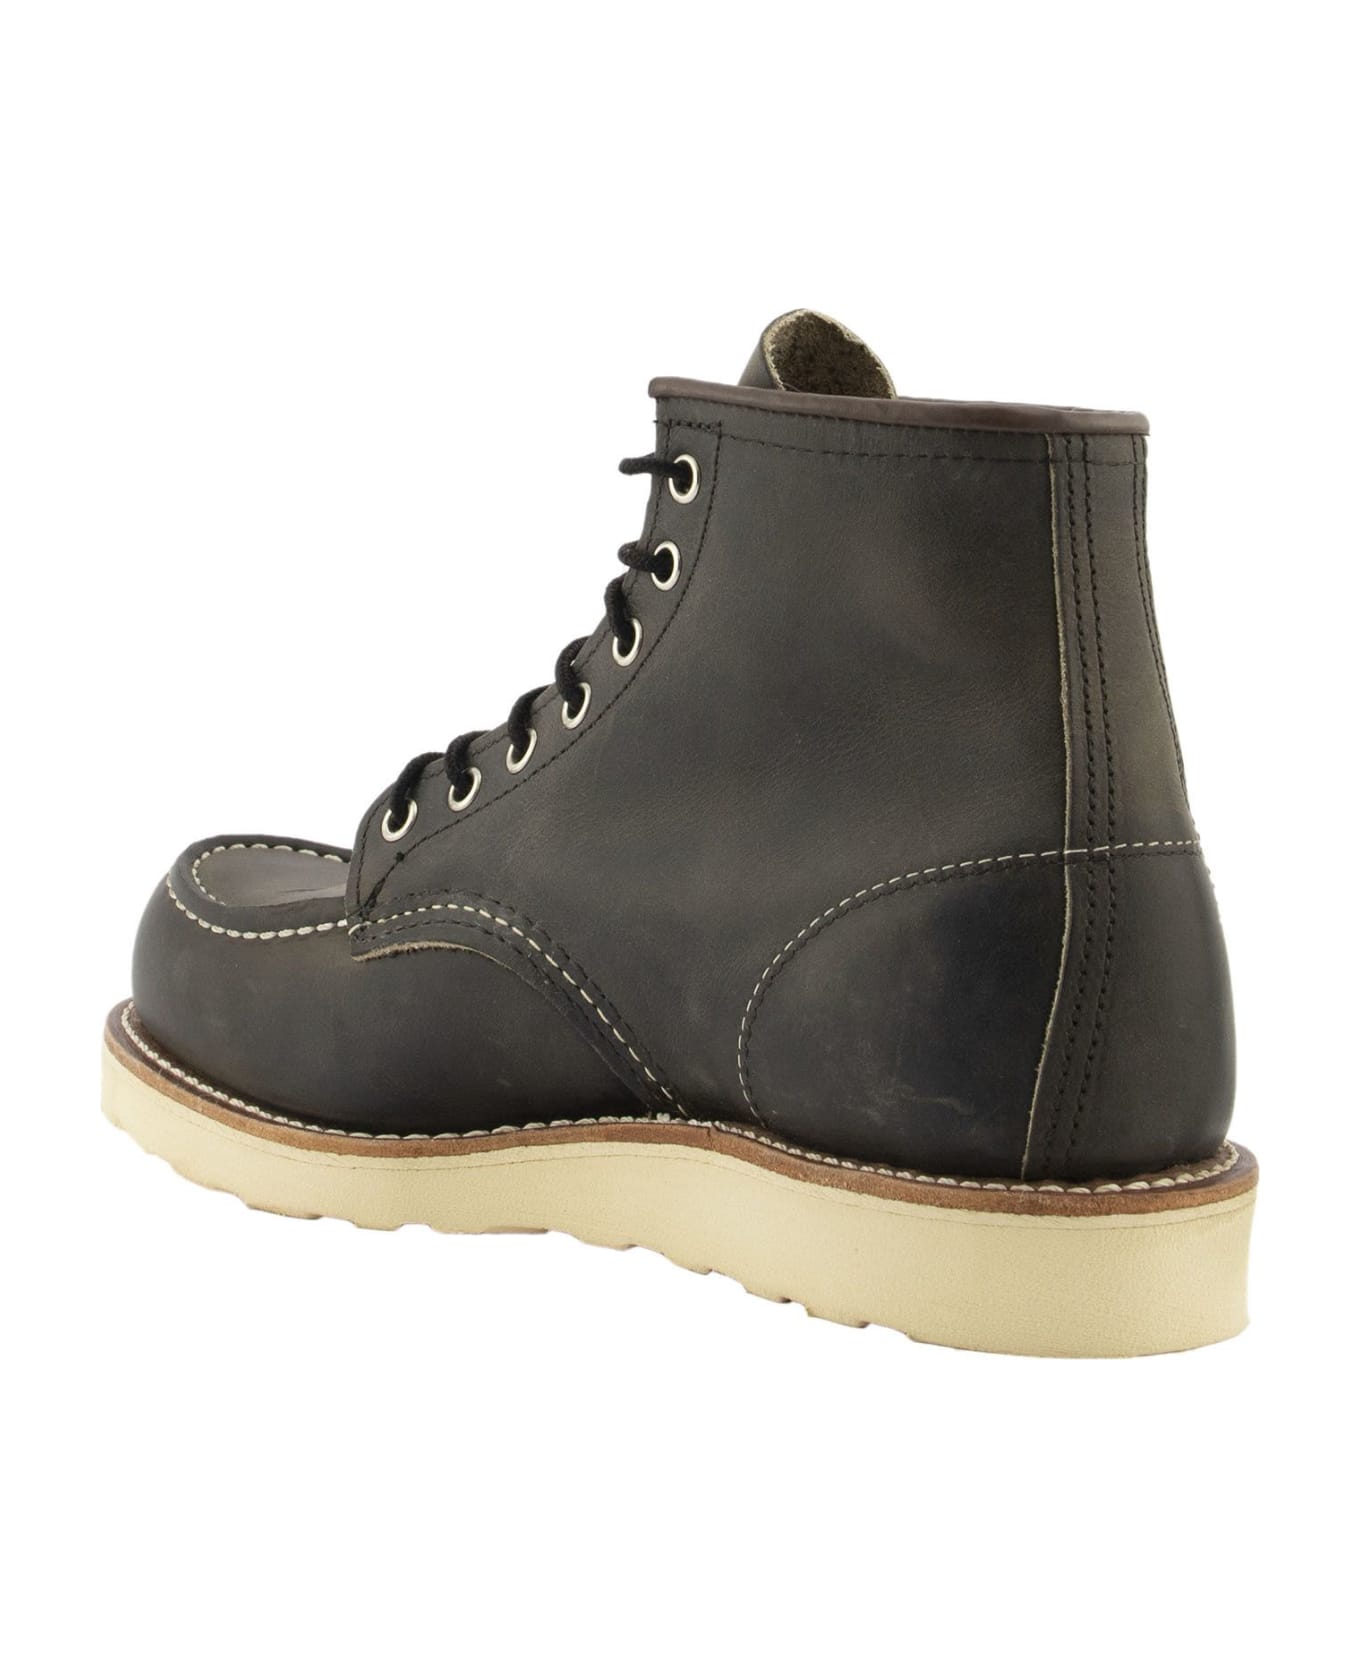 Red Wing Classic Moc - Rough And Tough Leather Boot - Charcoal